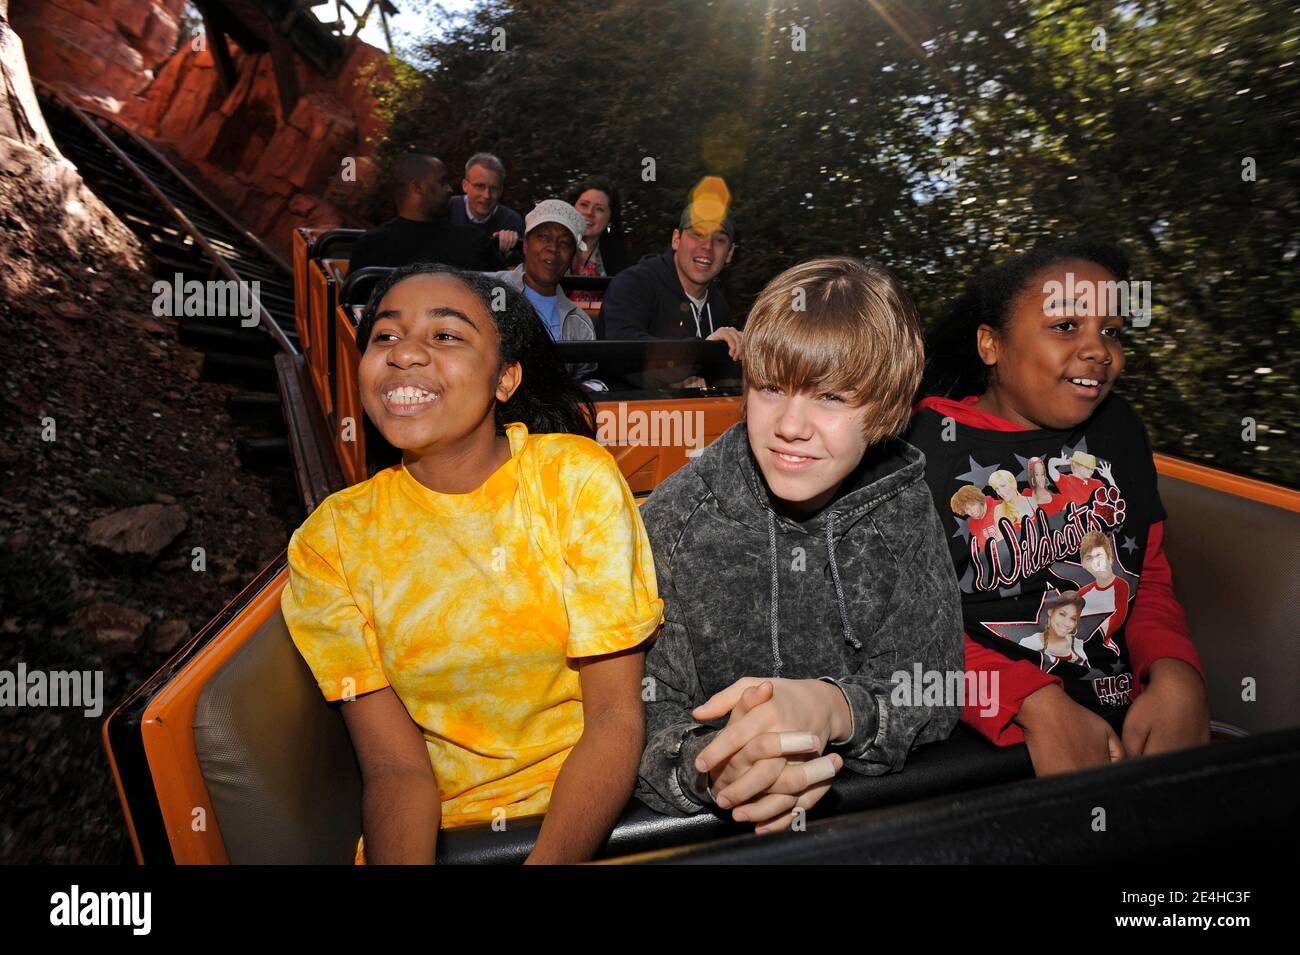 Canadian Pop Singer Justin Bieber C Rides The Big Thunder Mountain Railroad With Lucky Radio Disney Listener Nine Year Old Rebekah Parker R And Sister Rachel Parker At Epcot Fl Usa On December 19